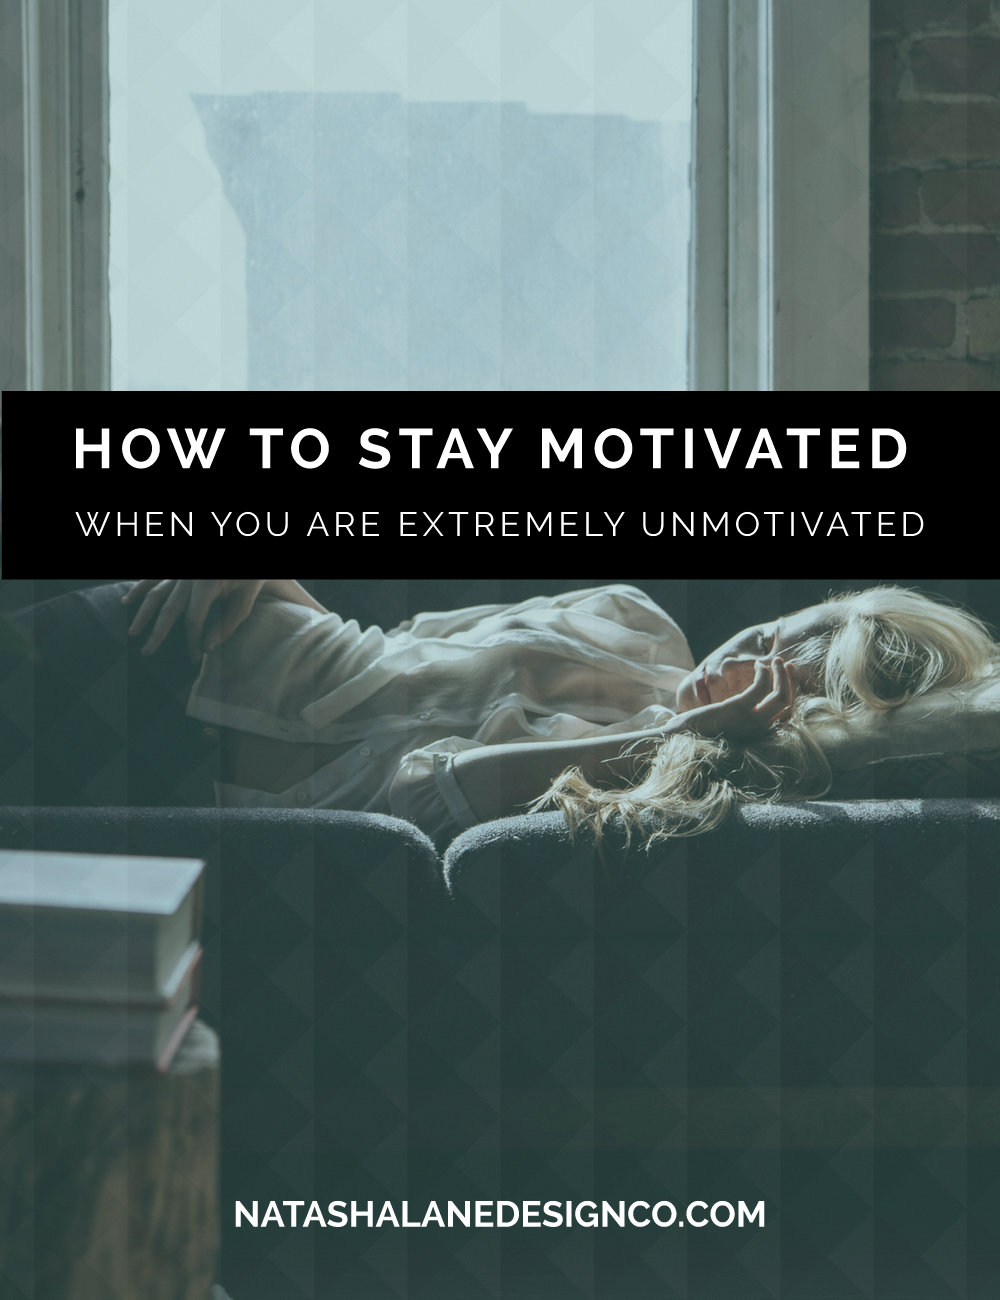 How to Stay Motivated When You are EXTREMELY Unmotivated